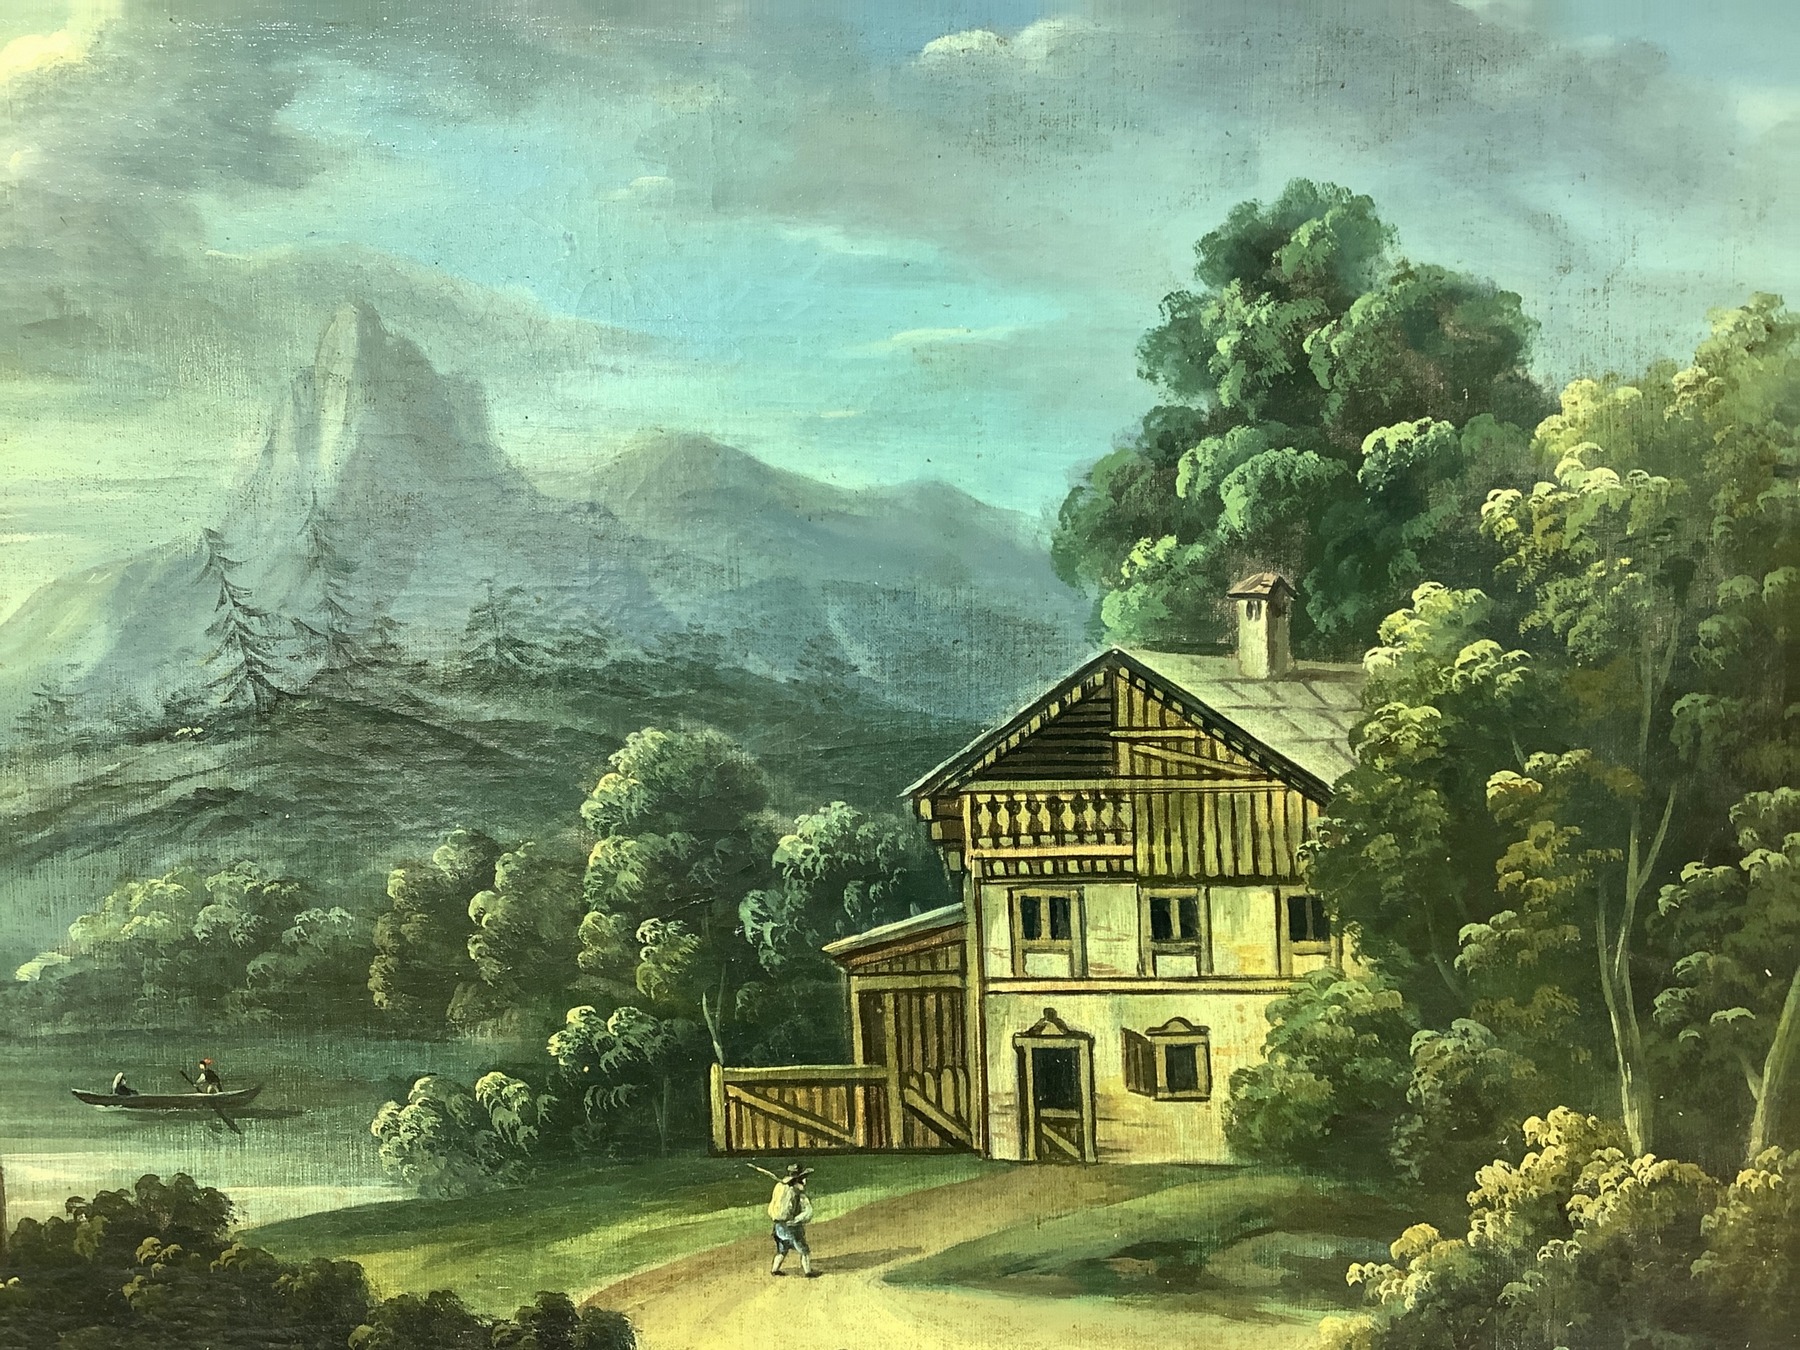 Oil painting on canvas depicting mountain landscape with lake and cottage, Federico Moja (Milano, 20 - Image 3 of 5